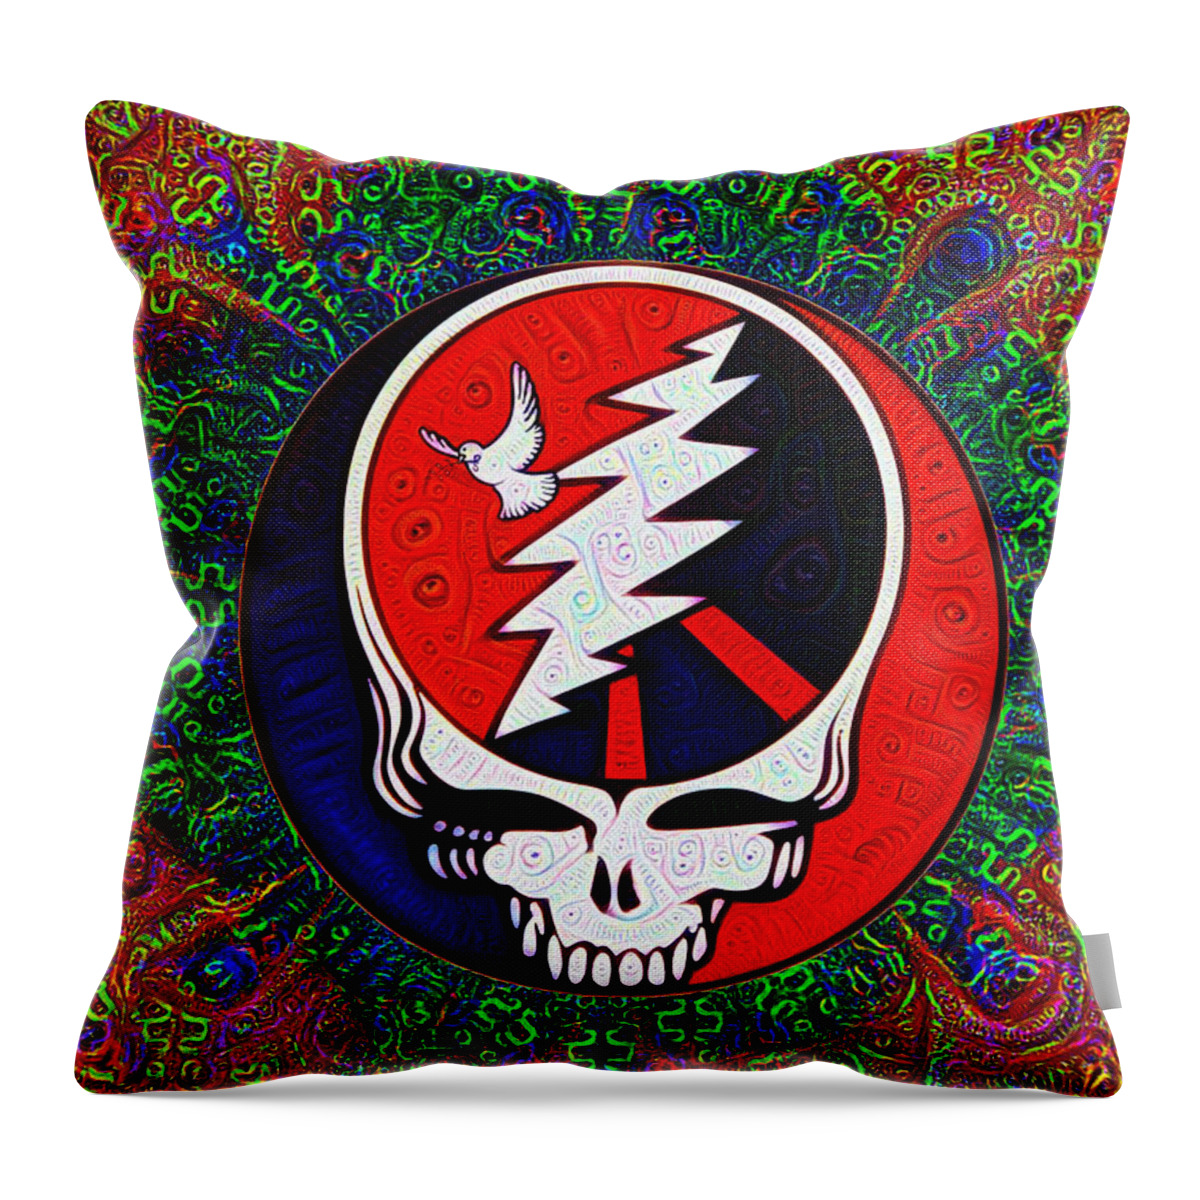 Grateful Throw Pillow featuring the painting Grateful Dead by Bill Cannon